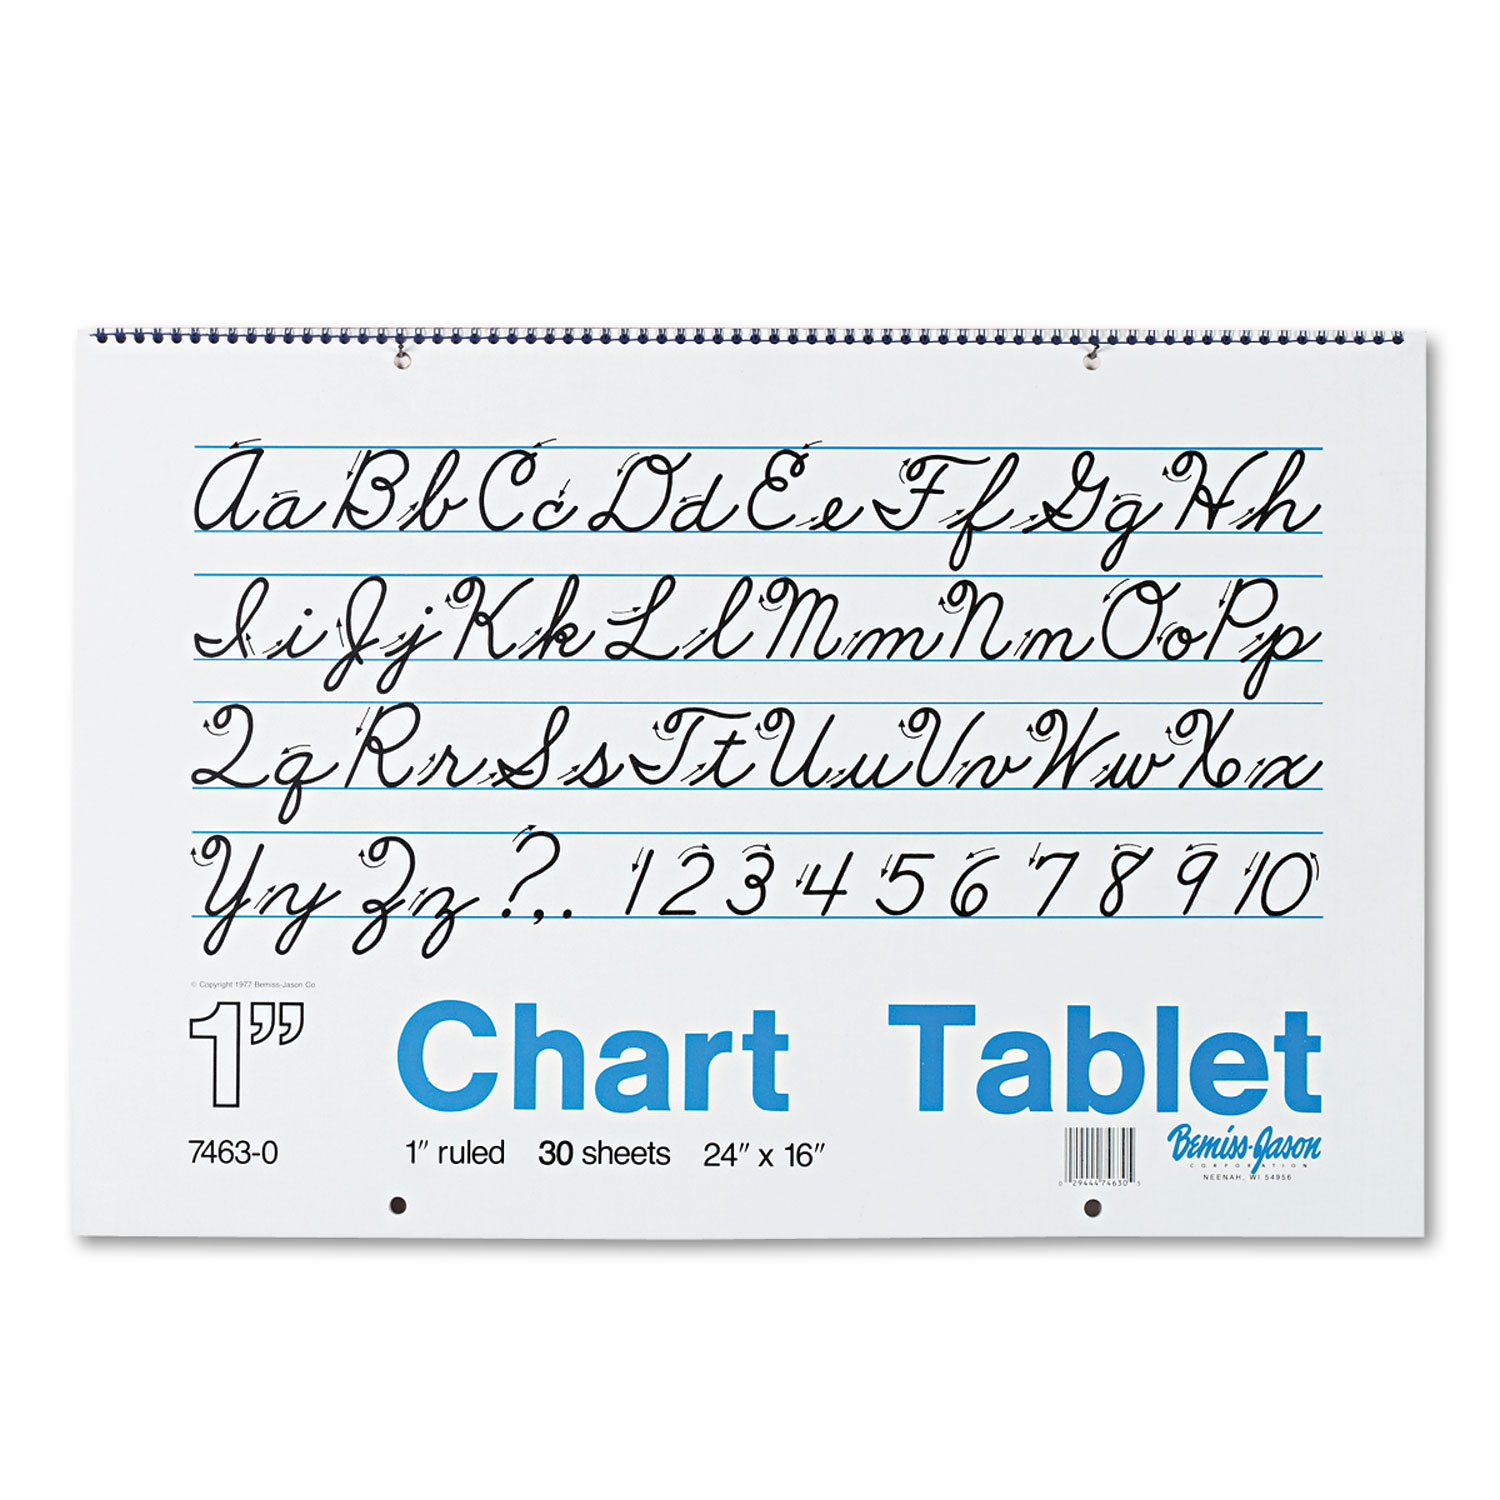  Pacon 74630 Chart Tablets, 1 Presentation Rule, 24 x 16, 30 Sheets (PAC74630) 